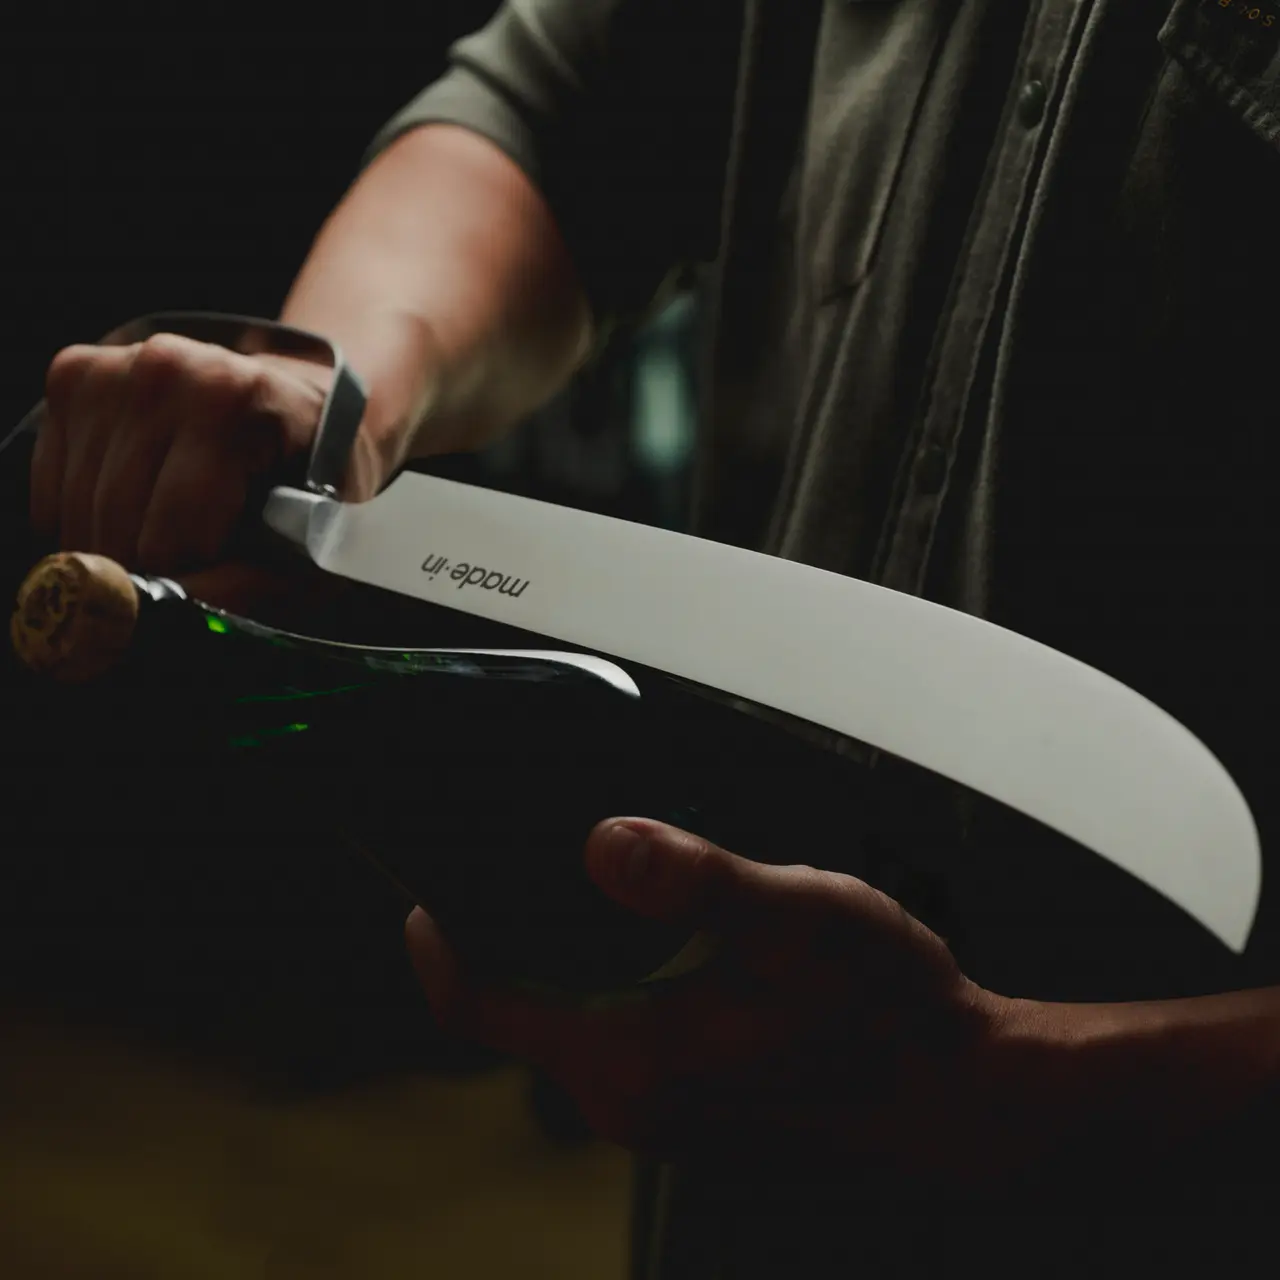 A person is elegantly opening a bottle of champagne with a saber, capturing the moment the bottle neck is severed.